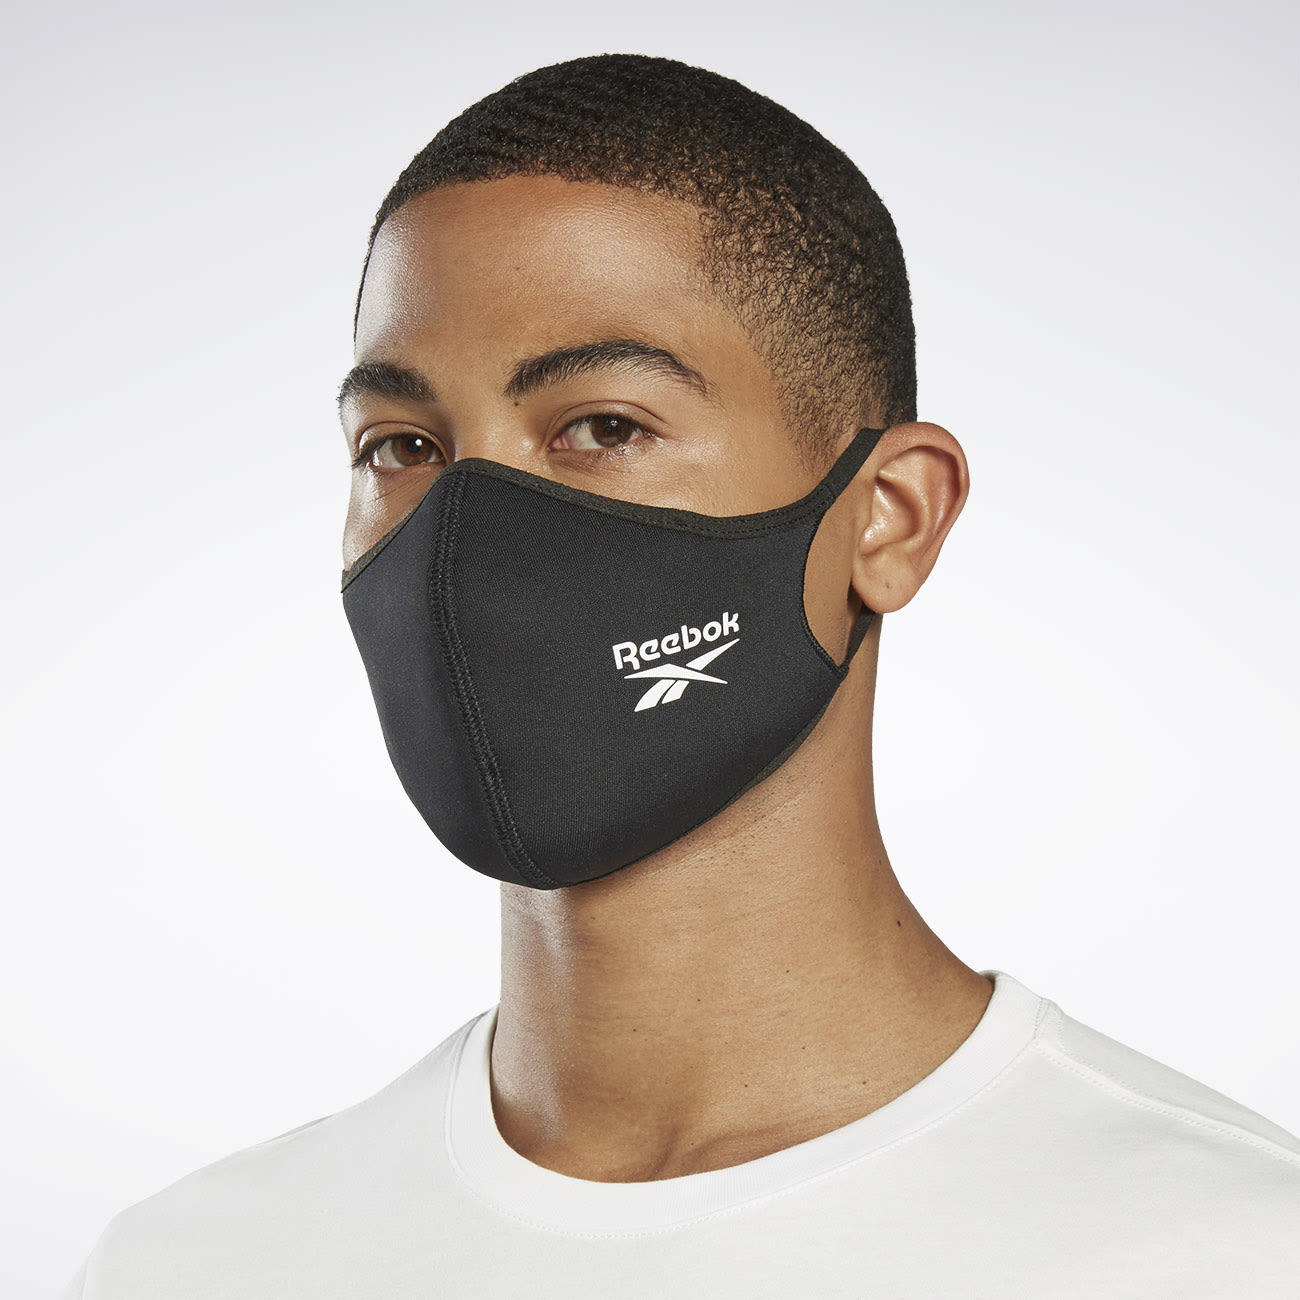 Lovely Cloth Face Cover For Men And Women Soft Anti Pollution Anti Dust Guard Cover Can be Washed and Reused